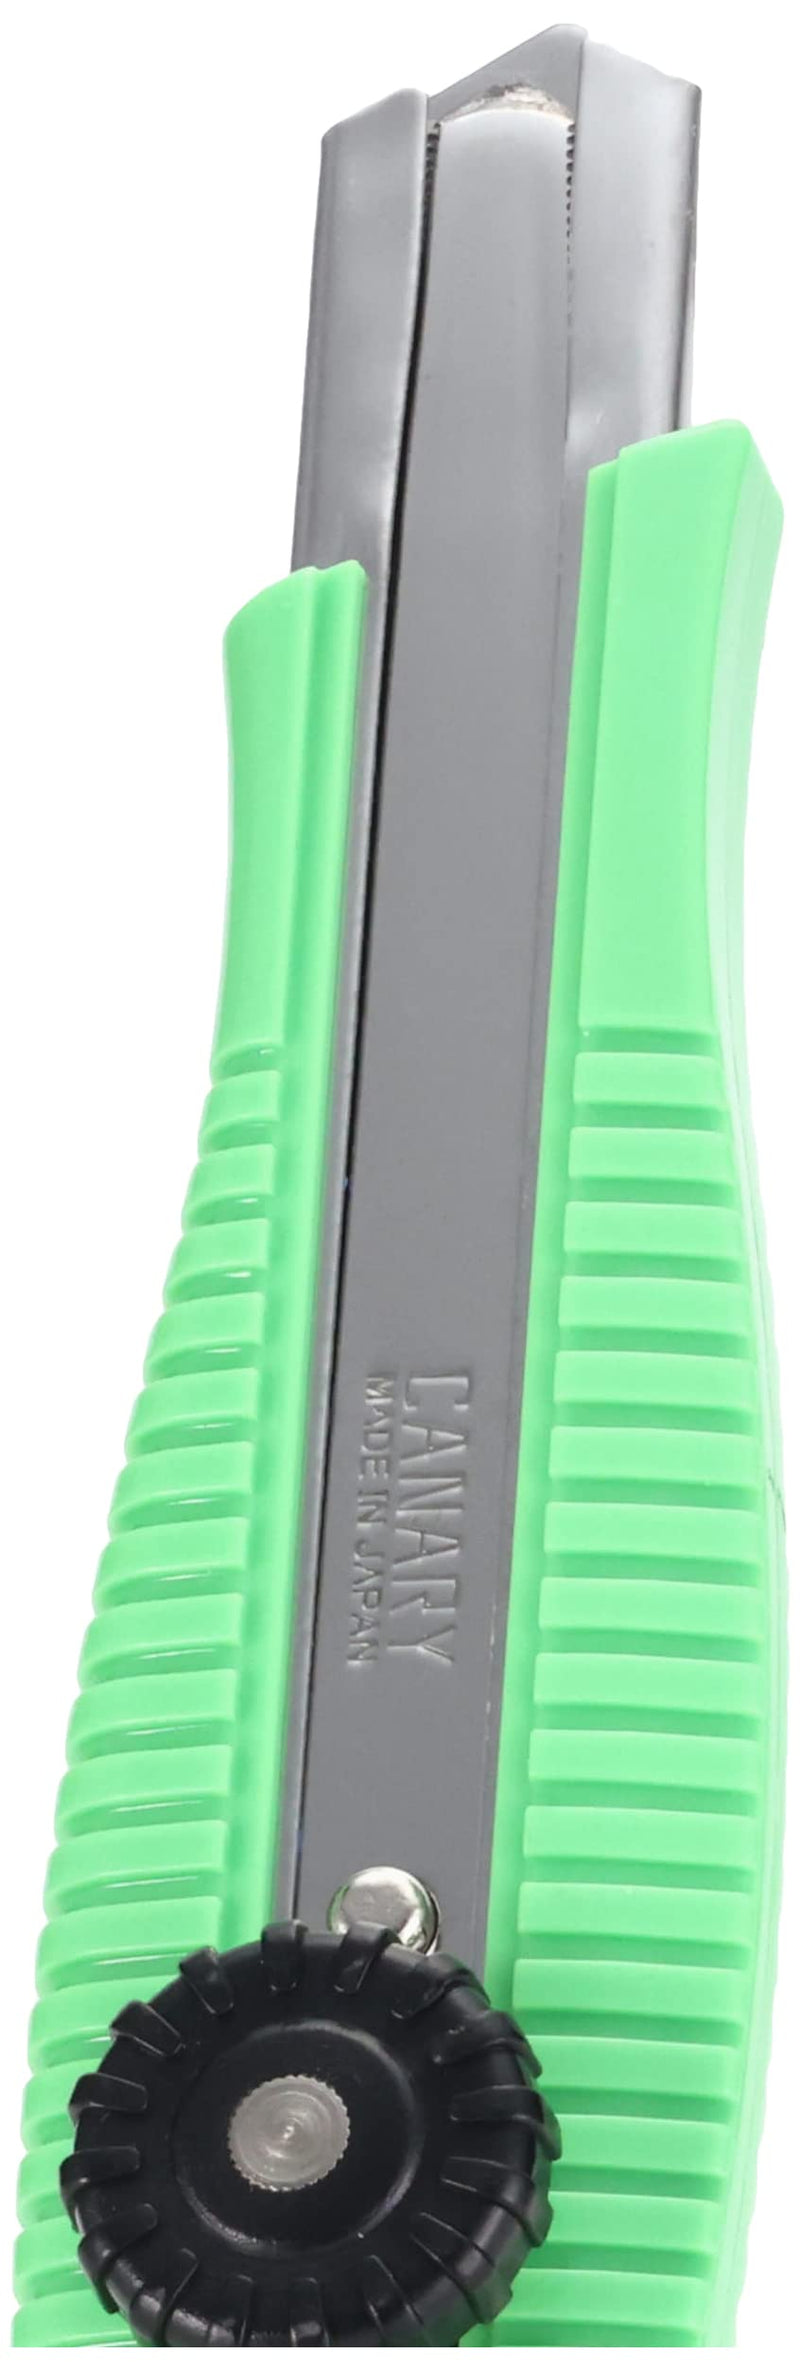  [AUSTRALIA] - CANARY Heavy Duty Box Cutter Retractable Blade, Safety Corrugated Cardboard Cutter Knife, Made in Japan, Green (DC-25) Sivler, Normal Blade